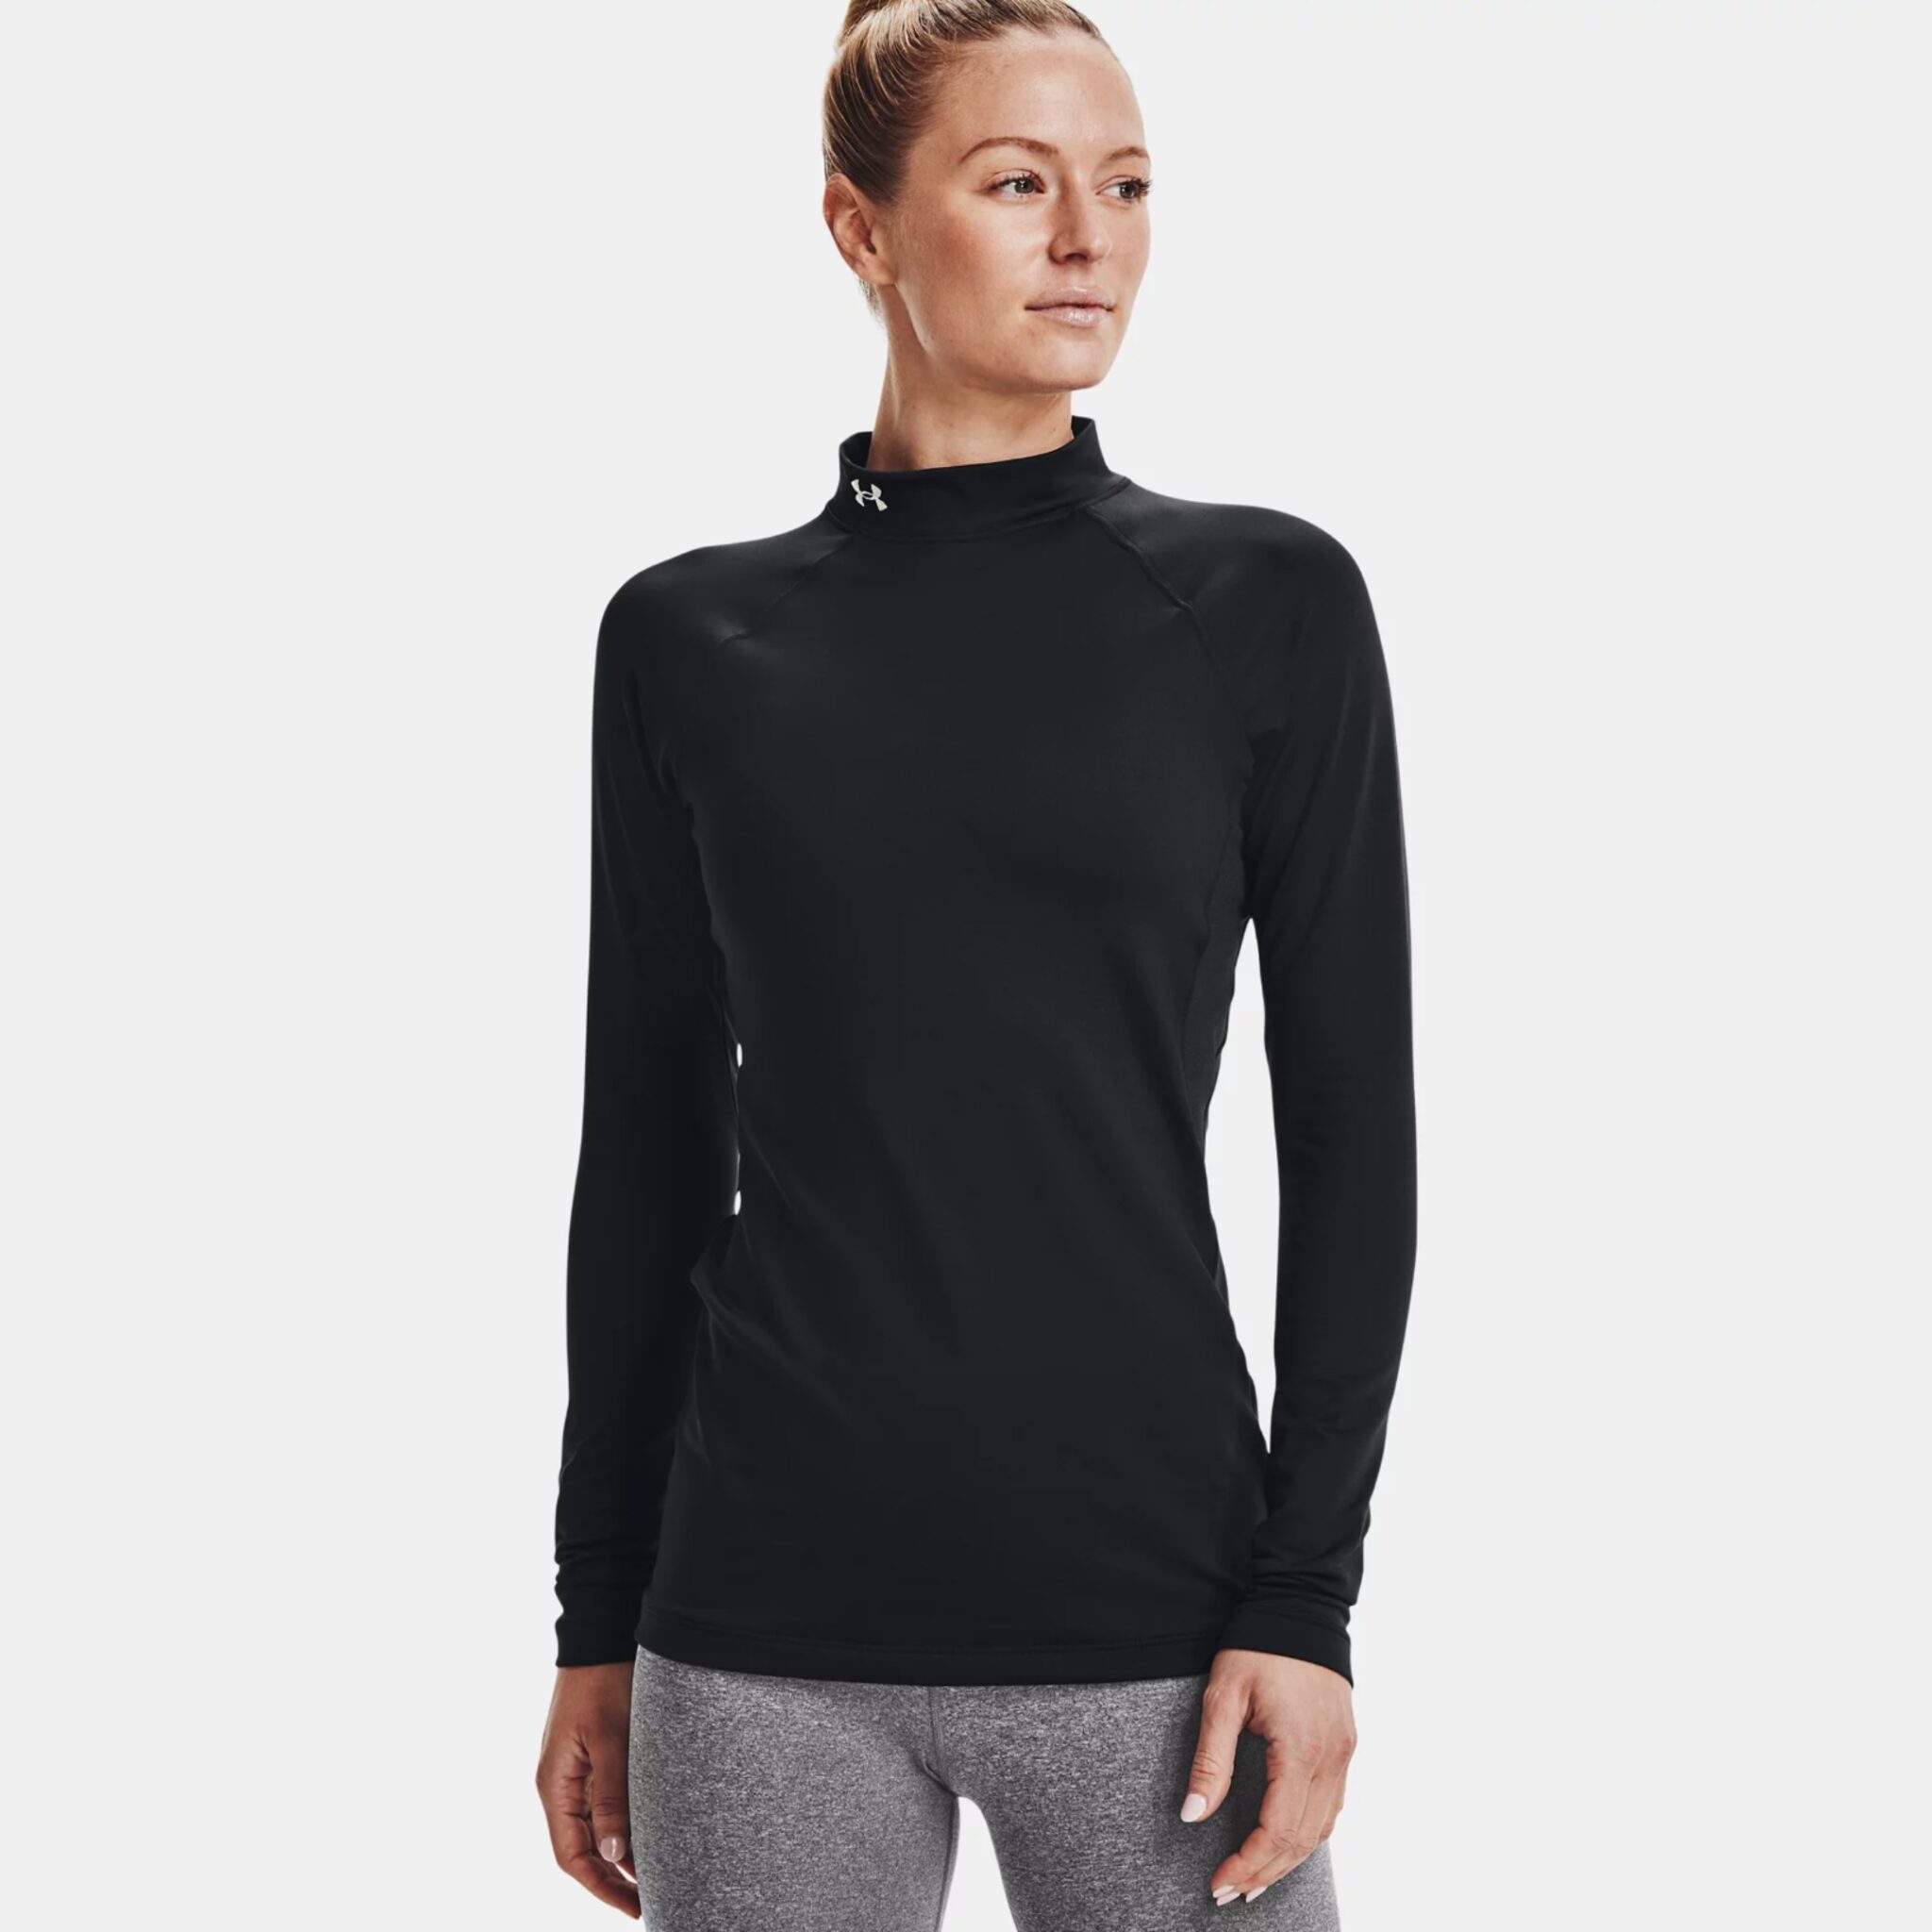 Best base layer for skiing for women